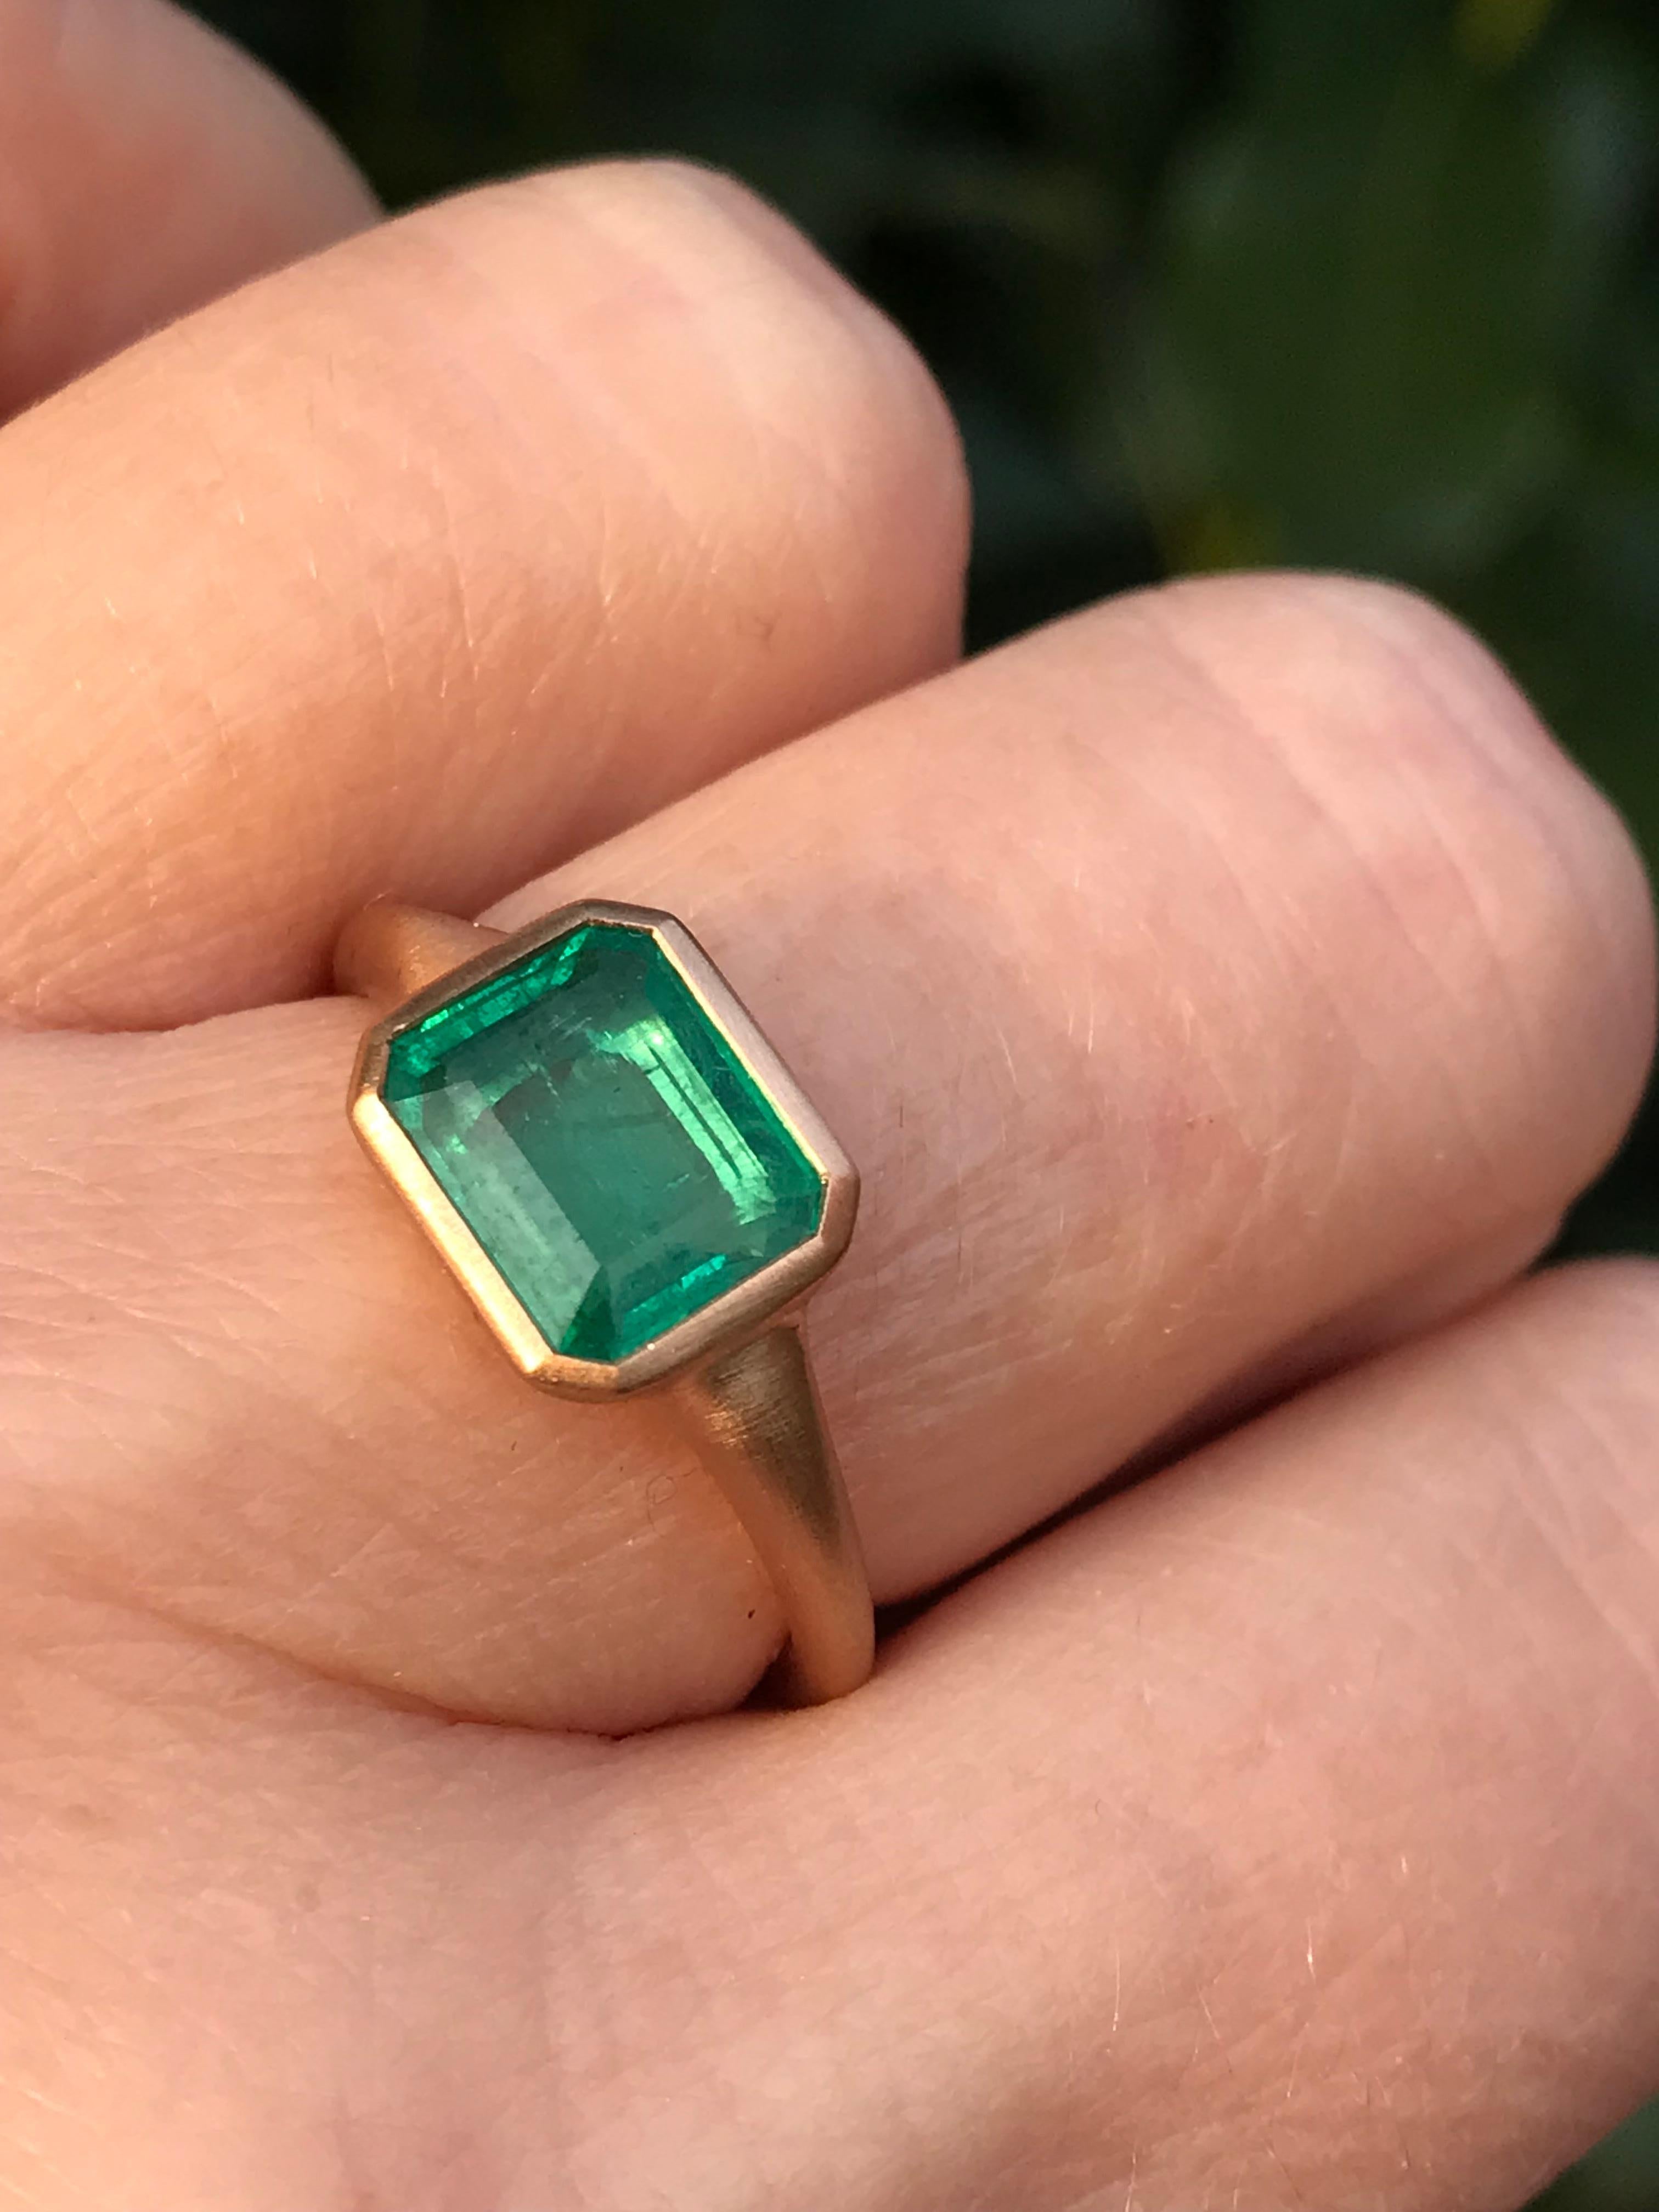 Dalben design One of a Kind 18k rose gold satin finishing ring with a 1,95 carat bezel-set emerald cut emerald. 
Ring size7 1/4 USA , 55 EU  re-sizable to most finger sizes. 
Bezel stone dimensions :
width 10,2 mm
height 8,4 mm
The ring has been